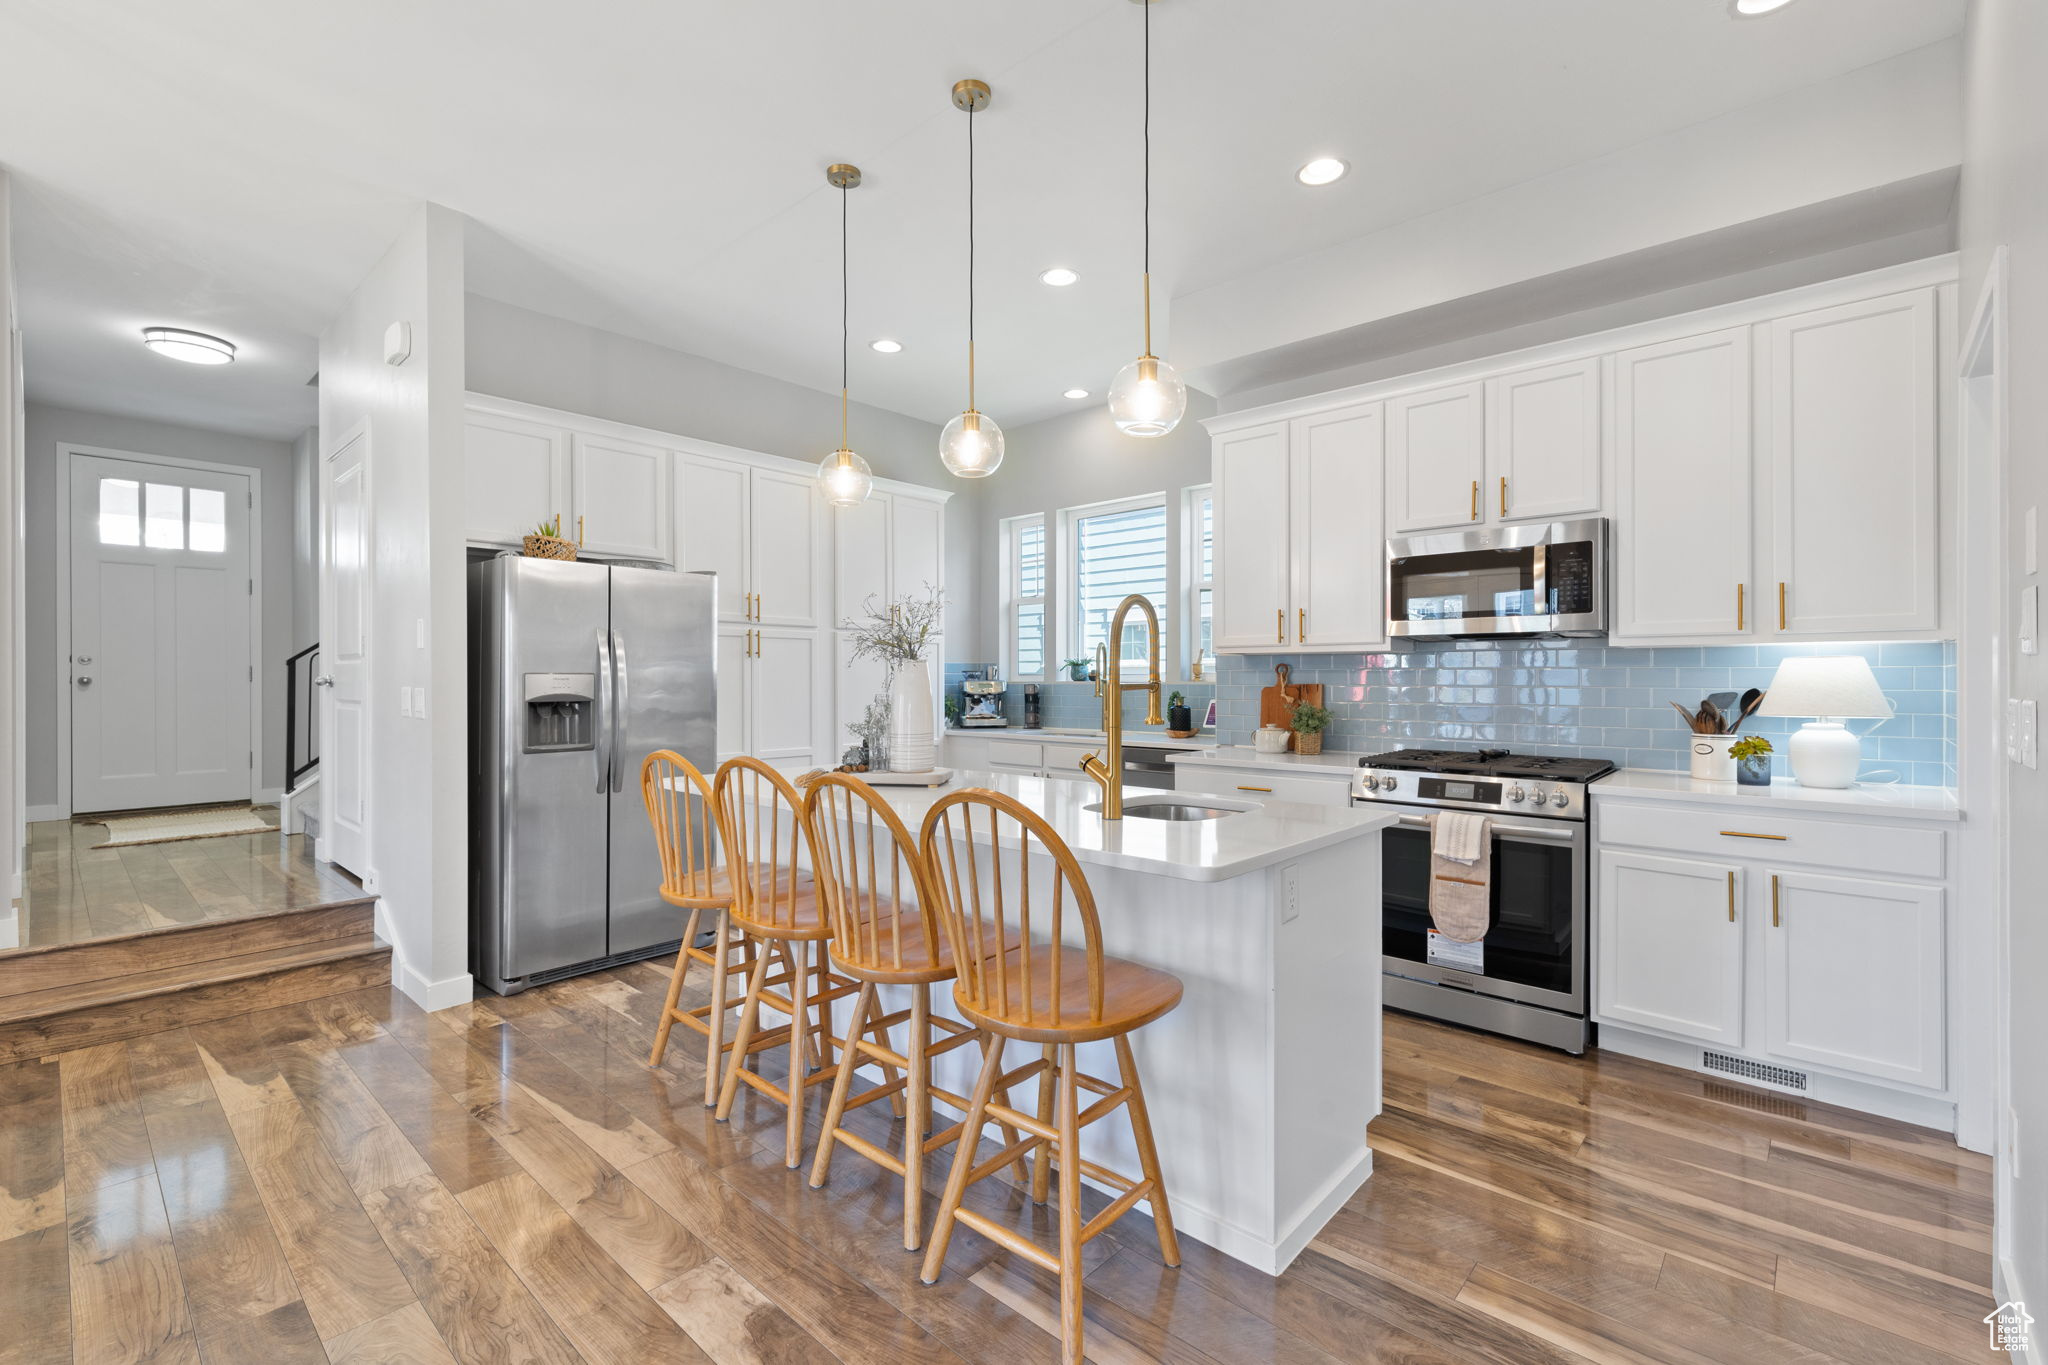 Kitchen with sink, white cabinetry, hardwood / wood-style floors, decorative light fixtures, and stainless steel appliances